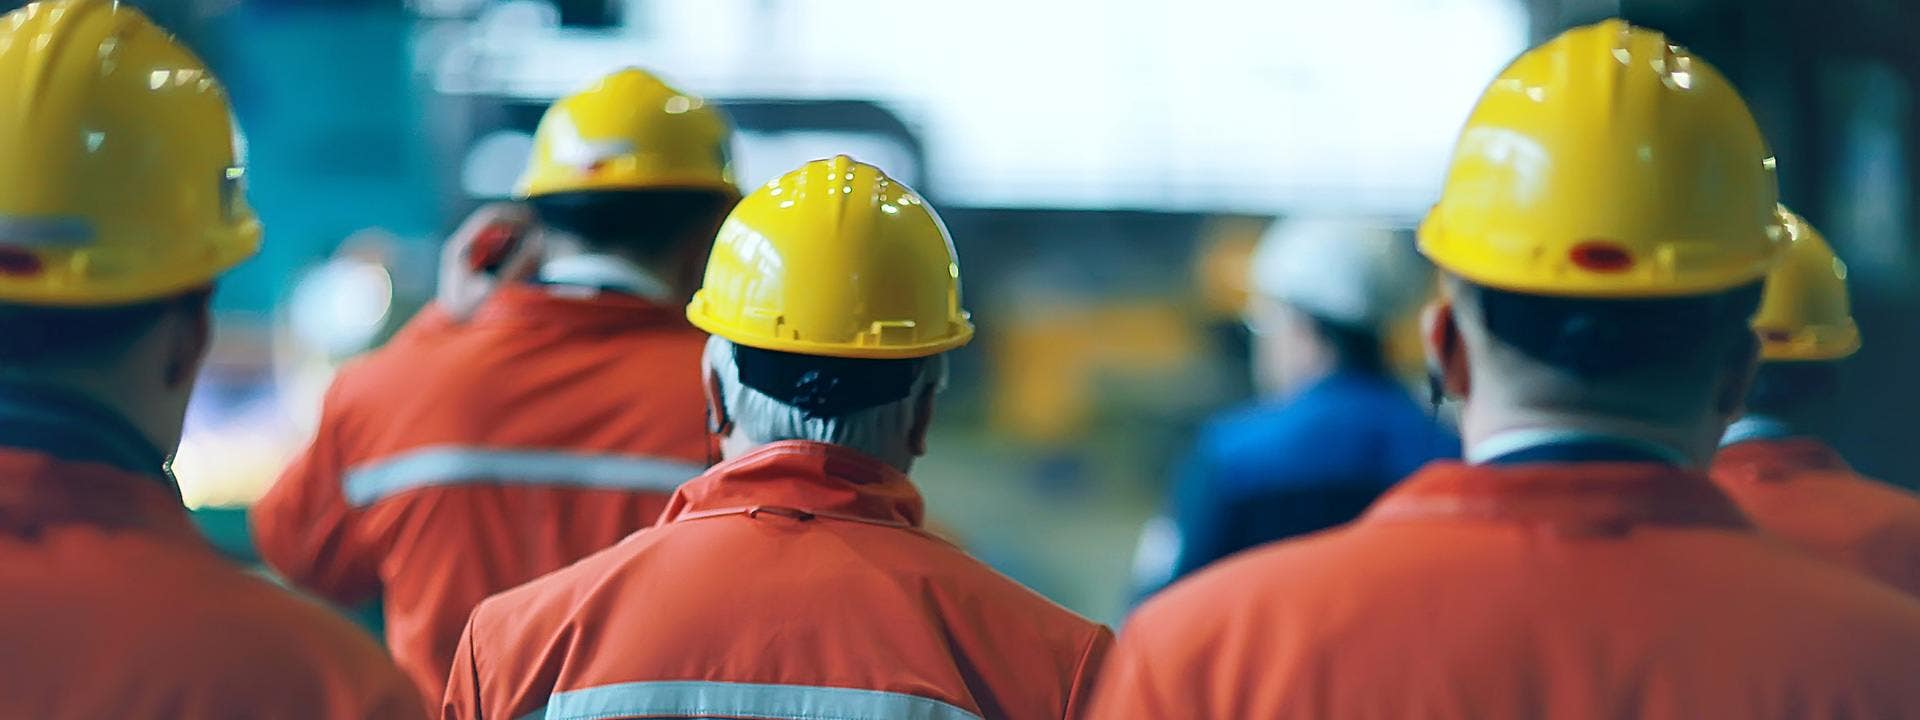 How to Become a Construction Health & Safety Officer